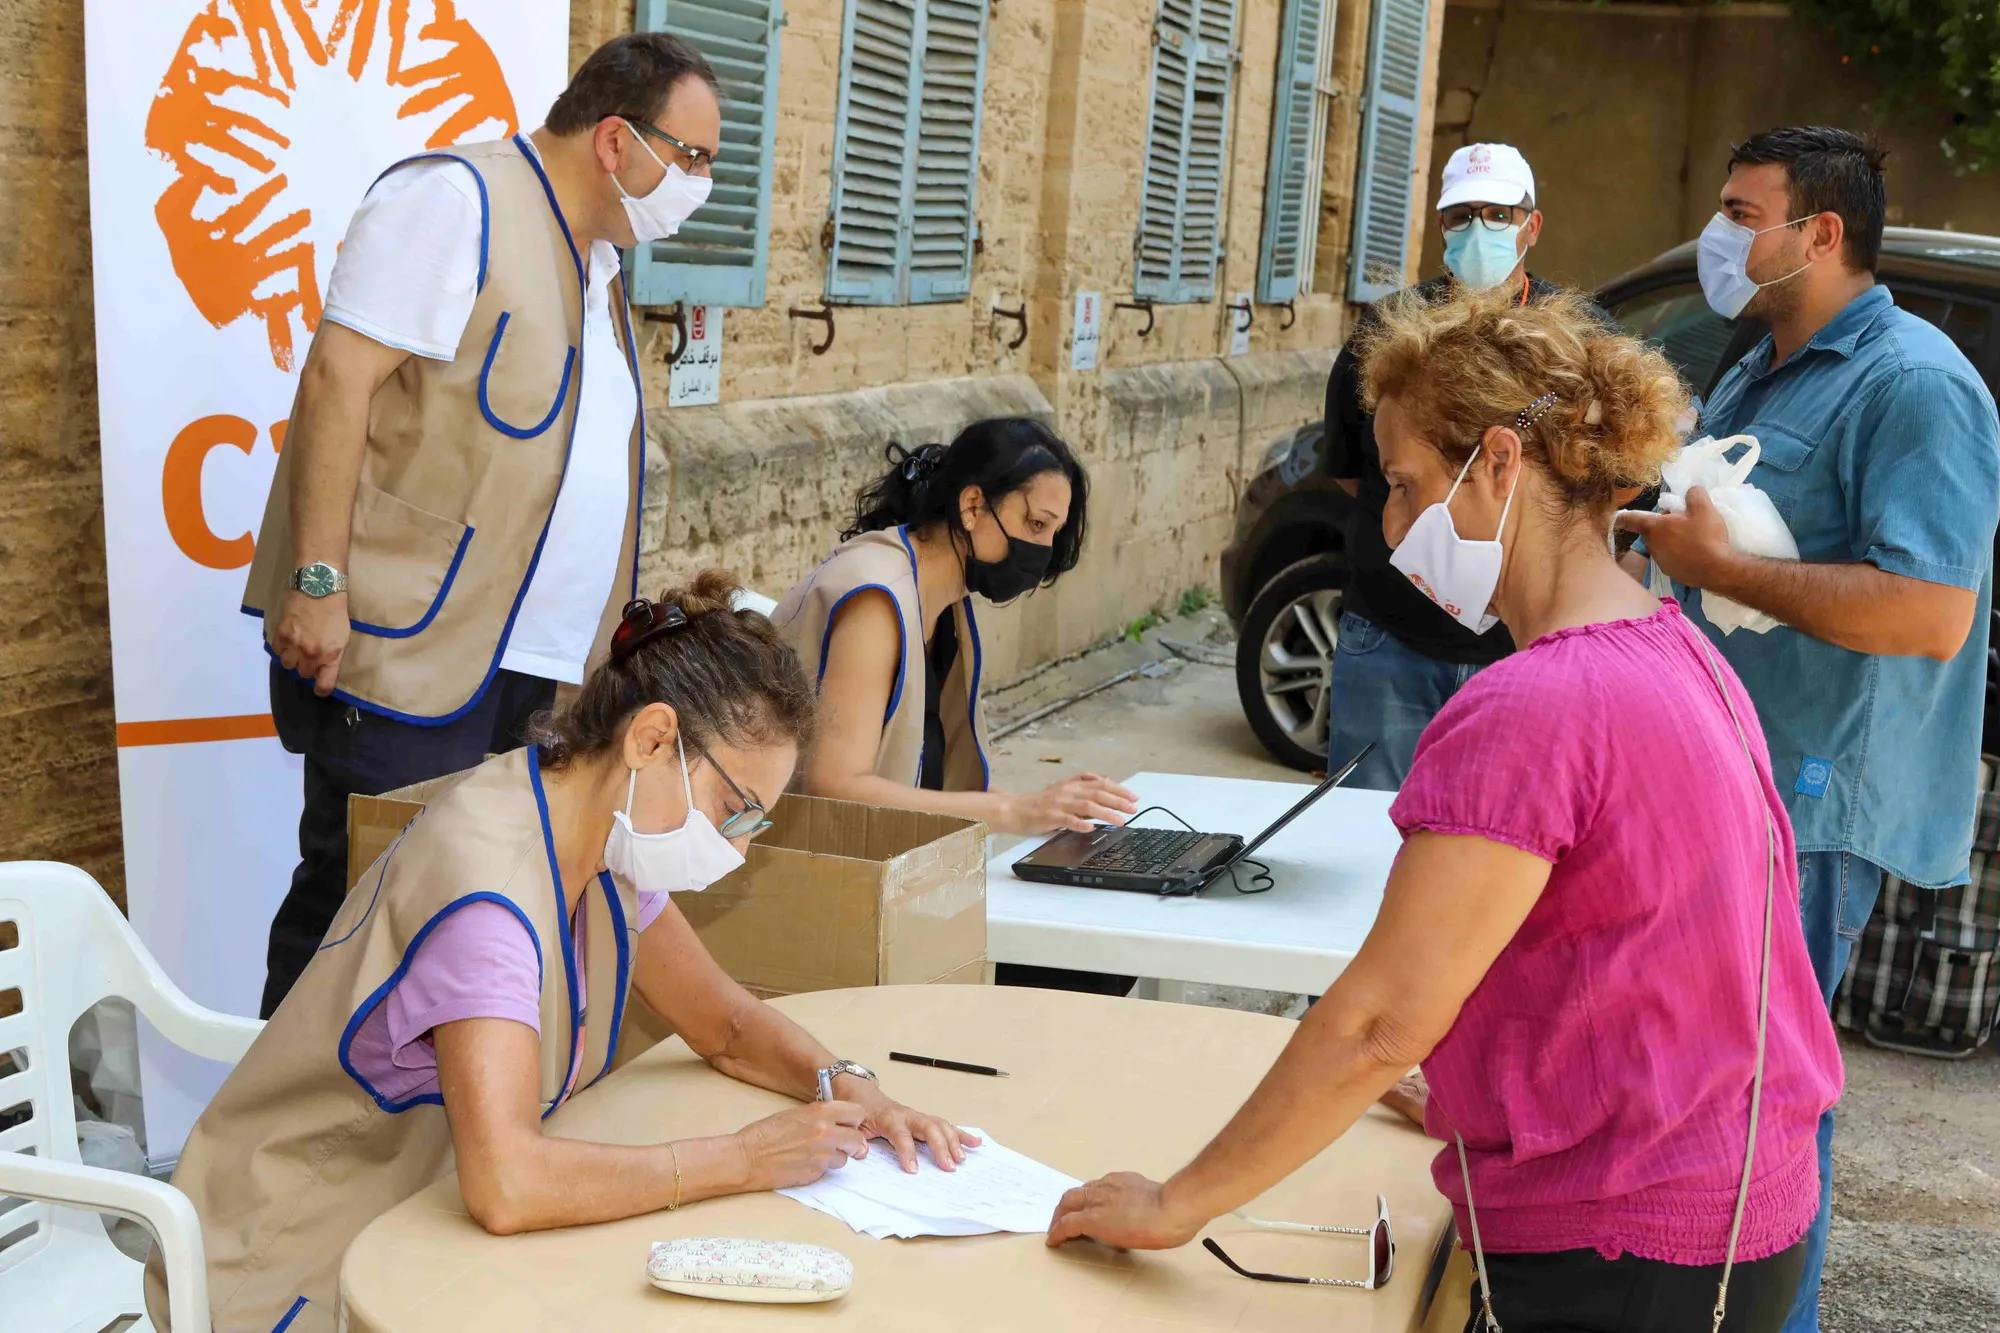 A woman worker in a mask fills out a form at a food distribution site in Beirut while another woman in a mask stands across the table from her.